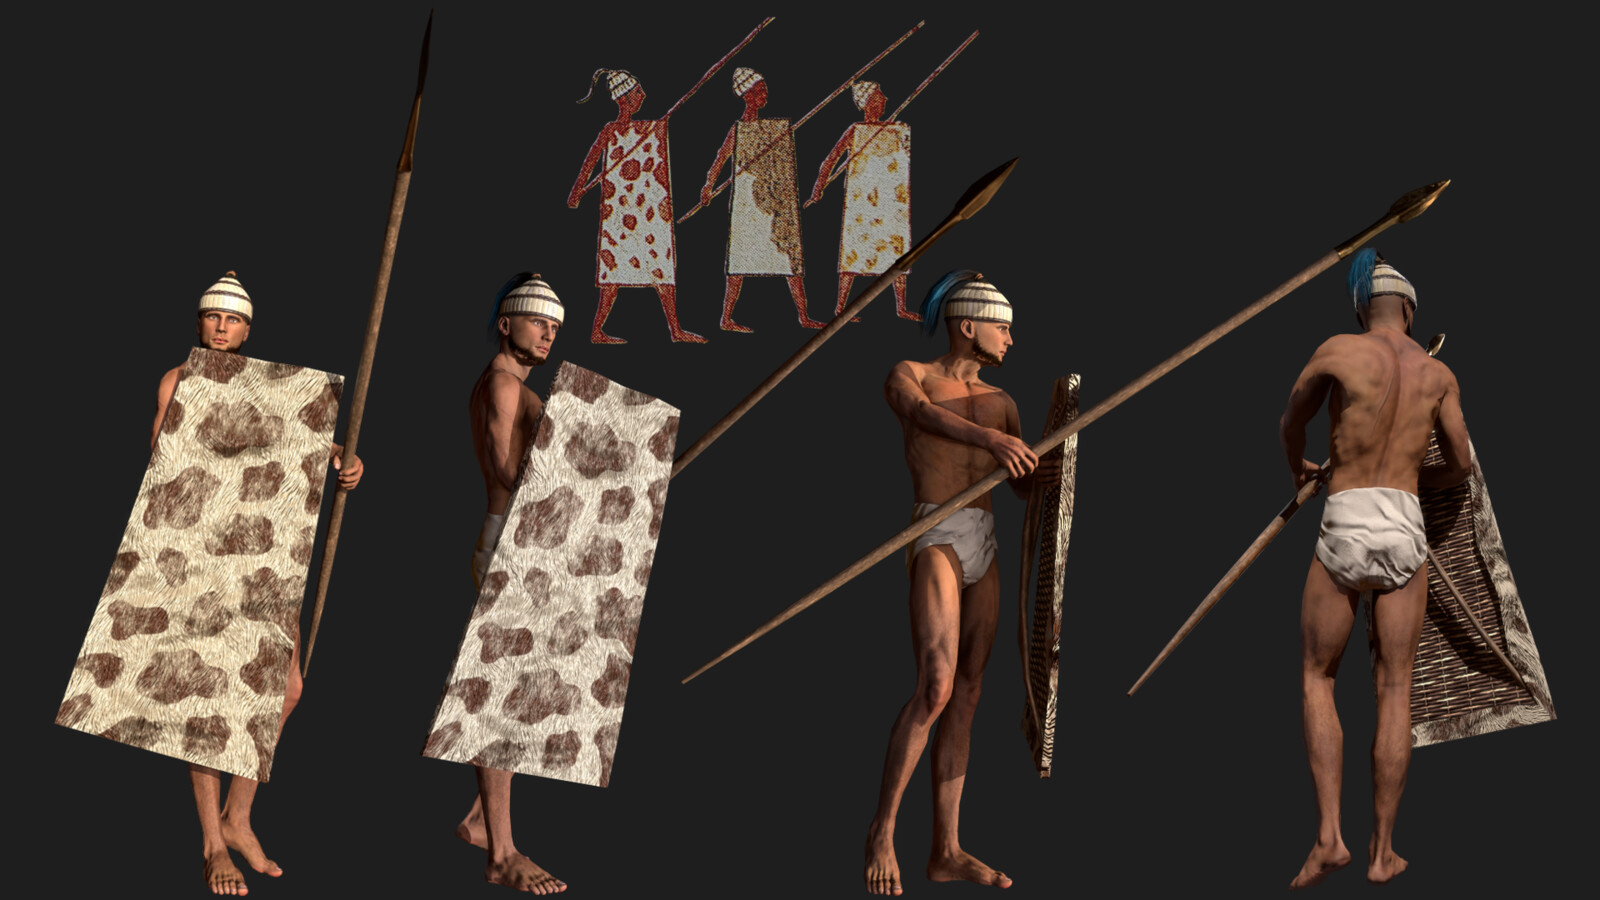 This character is based on the depiction of soldiers from the Flotilla Fresco from Akrotiri, Santorini. c.1620 BCE